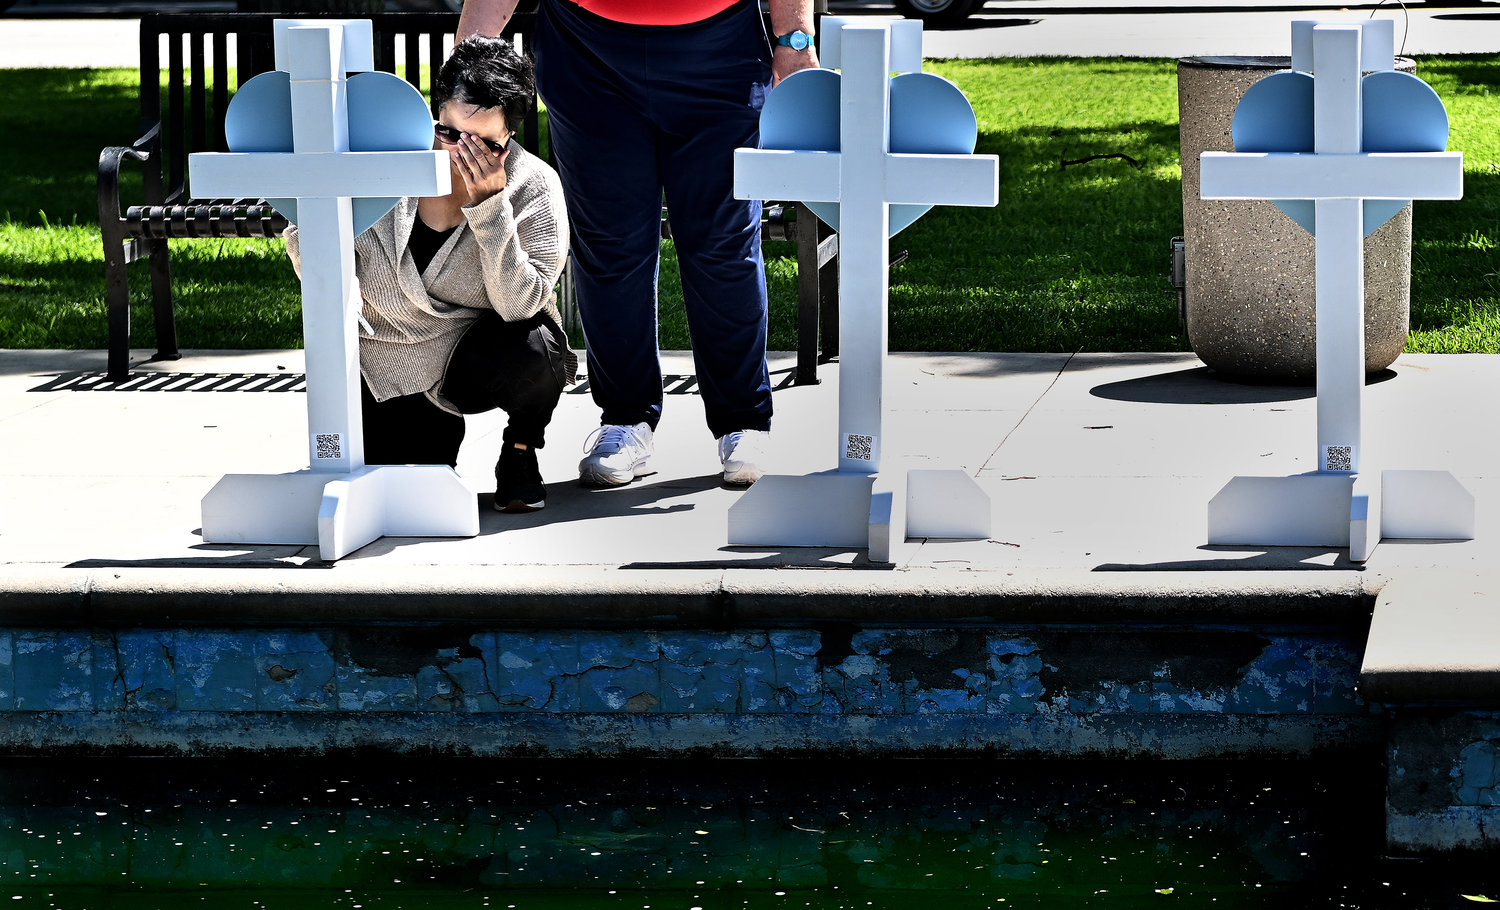 A Robb Elementary school employee named Amy visits a memorial for the victims of a mass shooting in Uvalde, Texas, on Thursday, May 26, 2022. Nineteen students and two teachers died when a gunman opened fire in a classroom Tuesday. (Wally Skalij/Los Angeles Times/TNS)